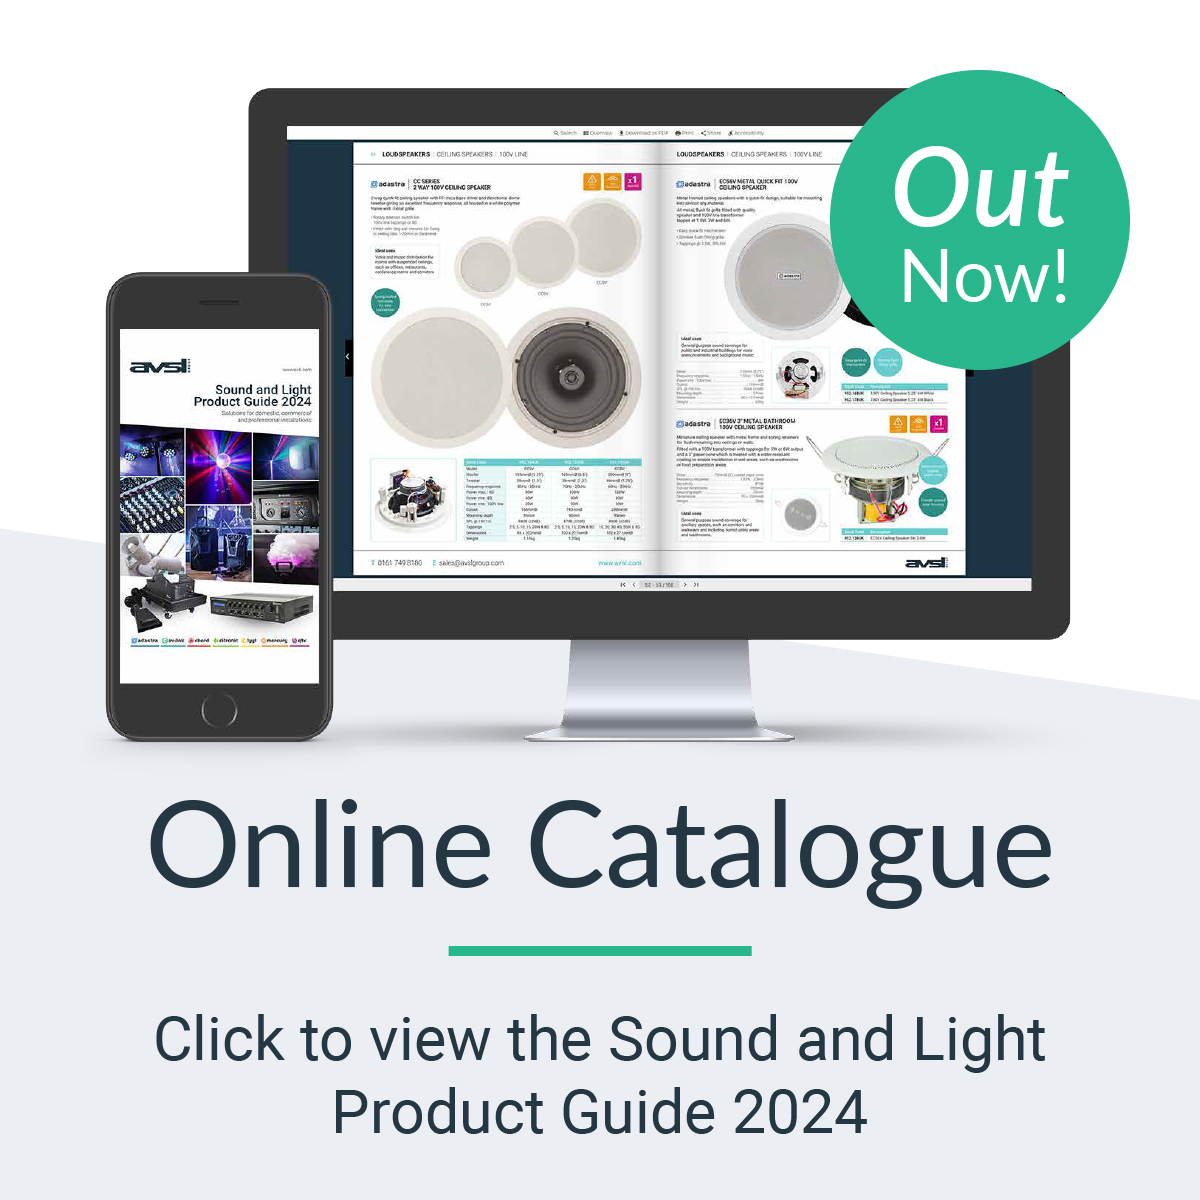 Online Catalogue - Sound and light product guide 2024